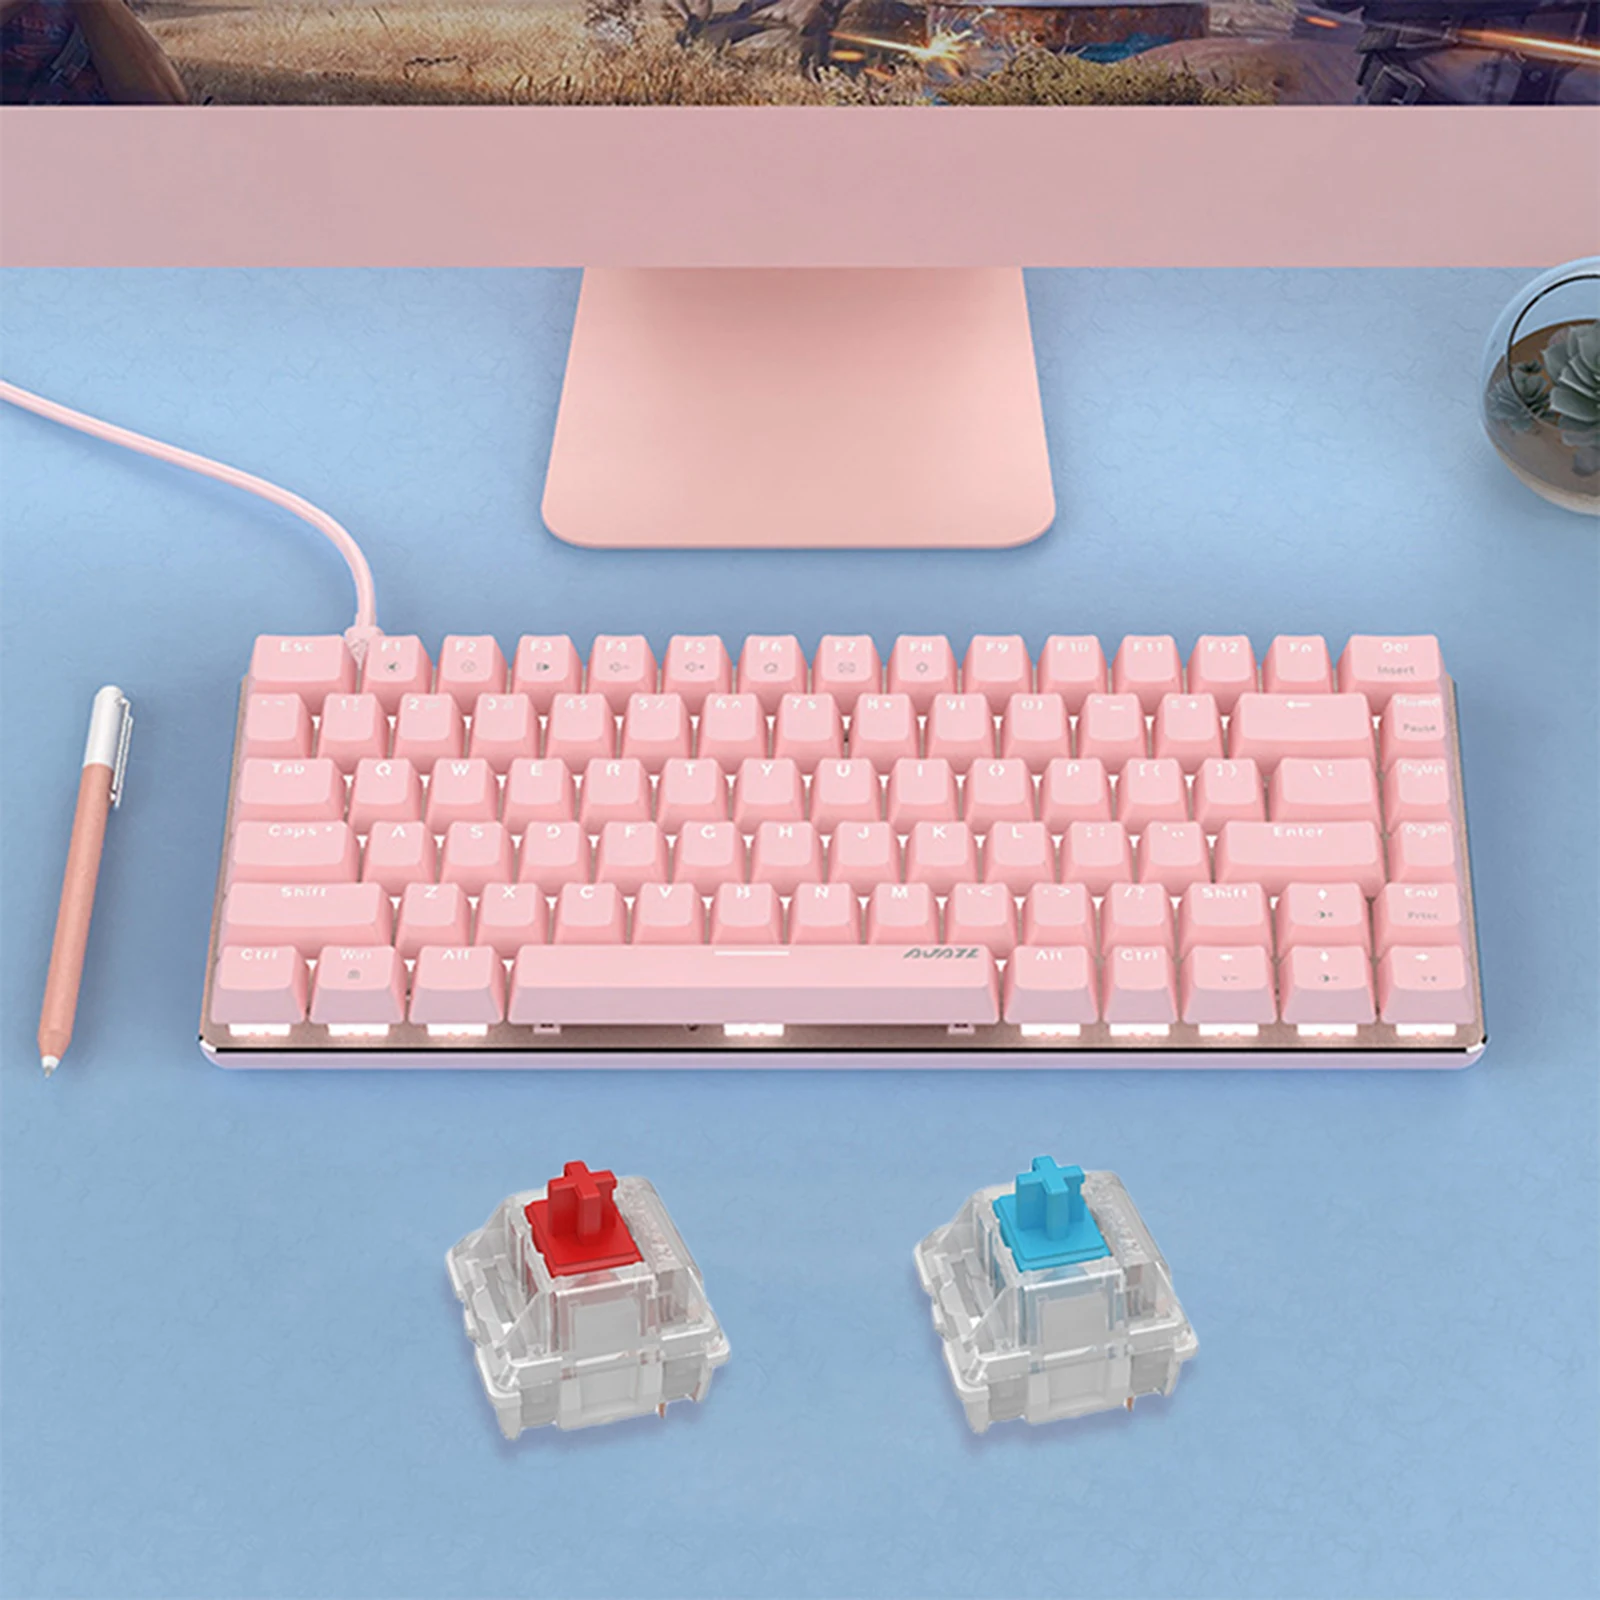 AK33 Mini Pink Switches Wired Keyboard 82 Keys Mini Compact for Games Work Portable